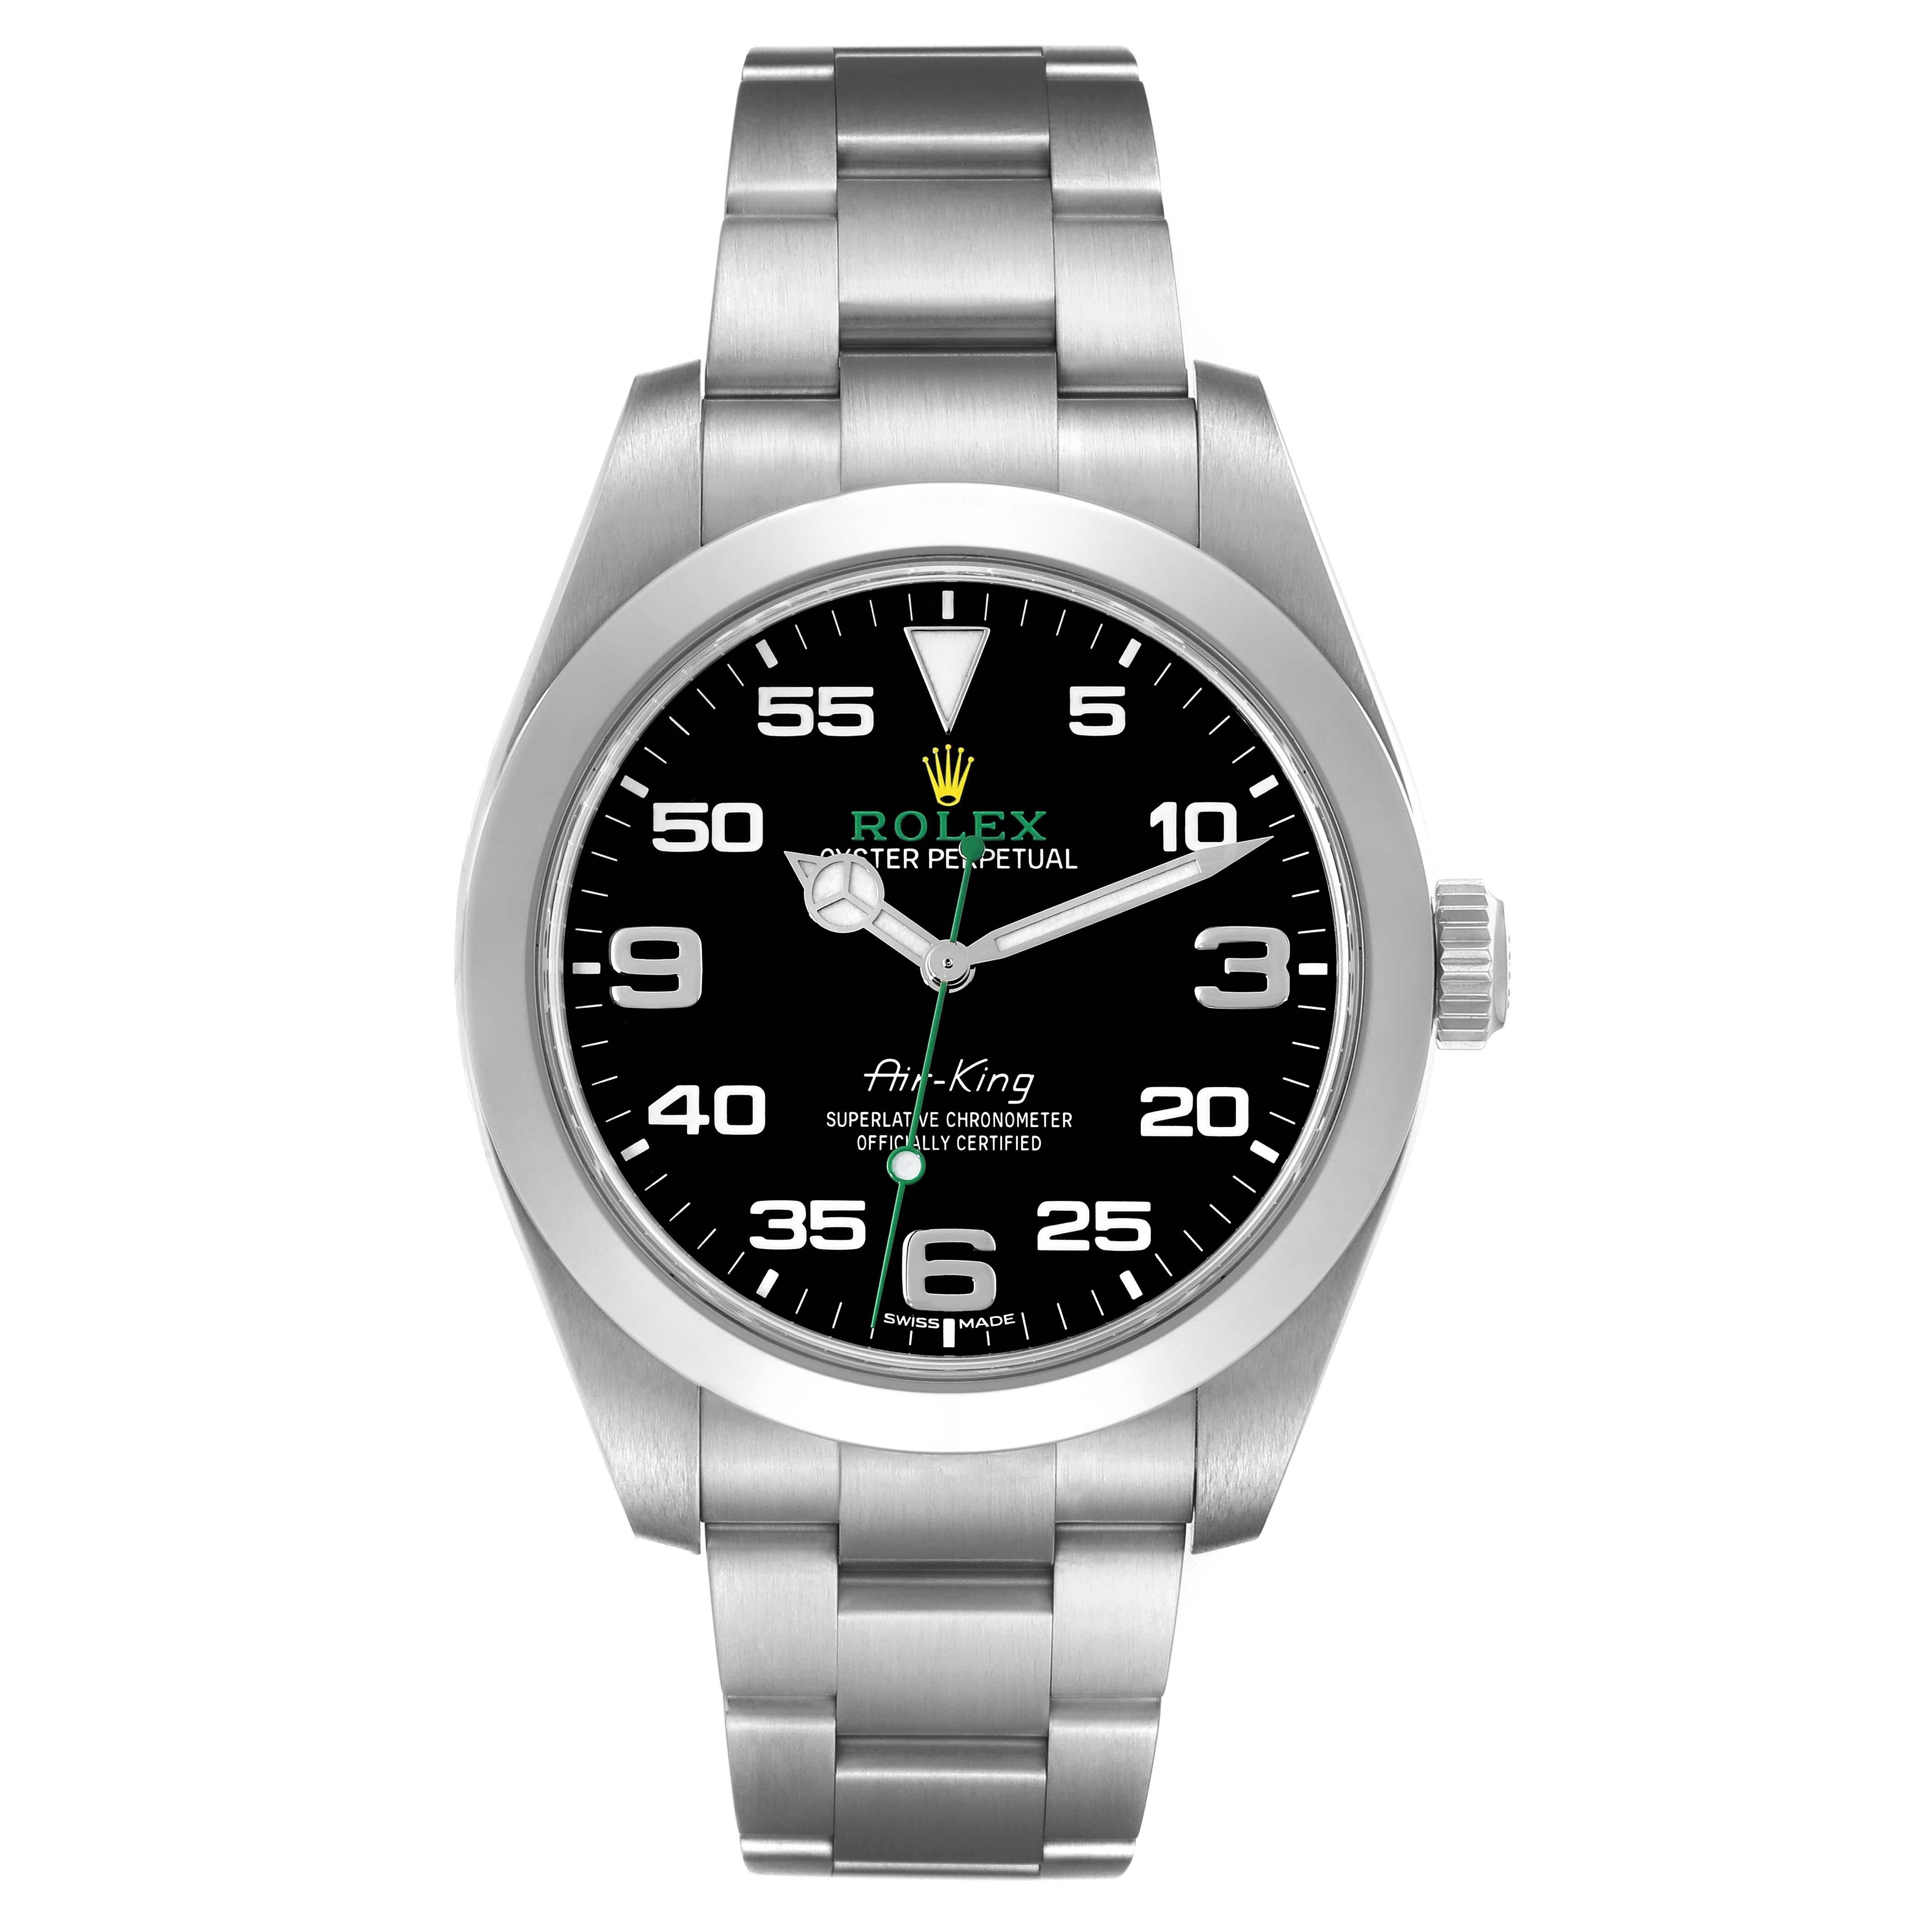 Rolex Oyster Perpetual Air King Green Hand Steel Mens Watch 116900 Box Card. Officially certified chronometer automatic self-winding movement. Stainless steel case 40.0 mm in diameter. Rolex logo on a crown. Stainless steel smooth domed bezel.